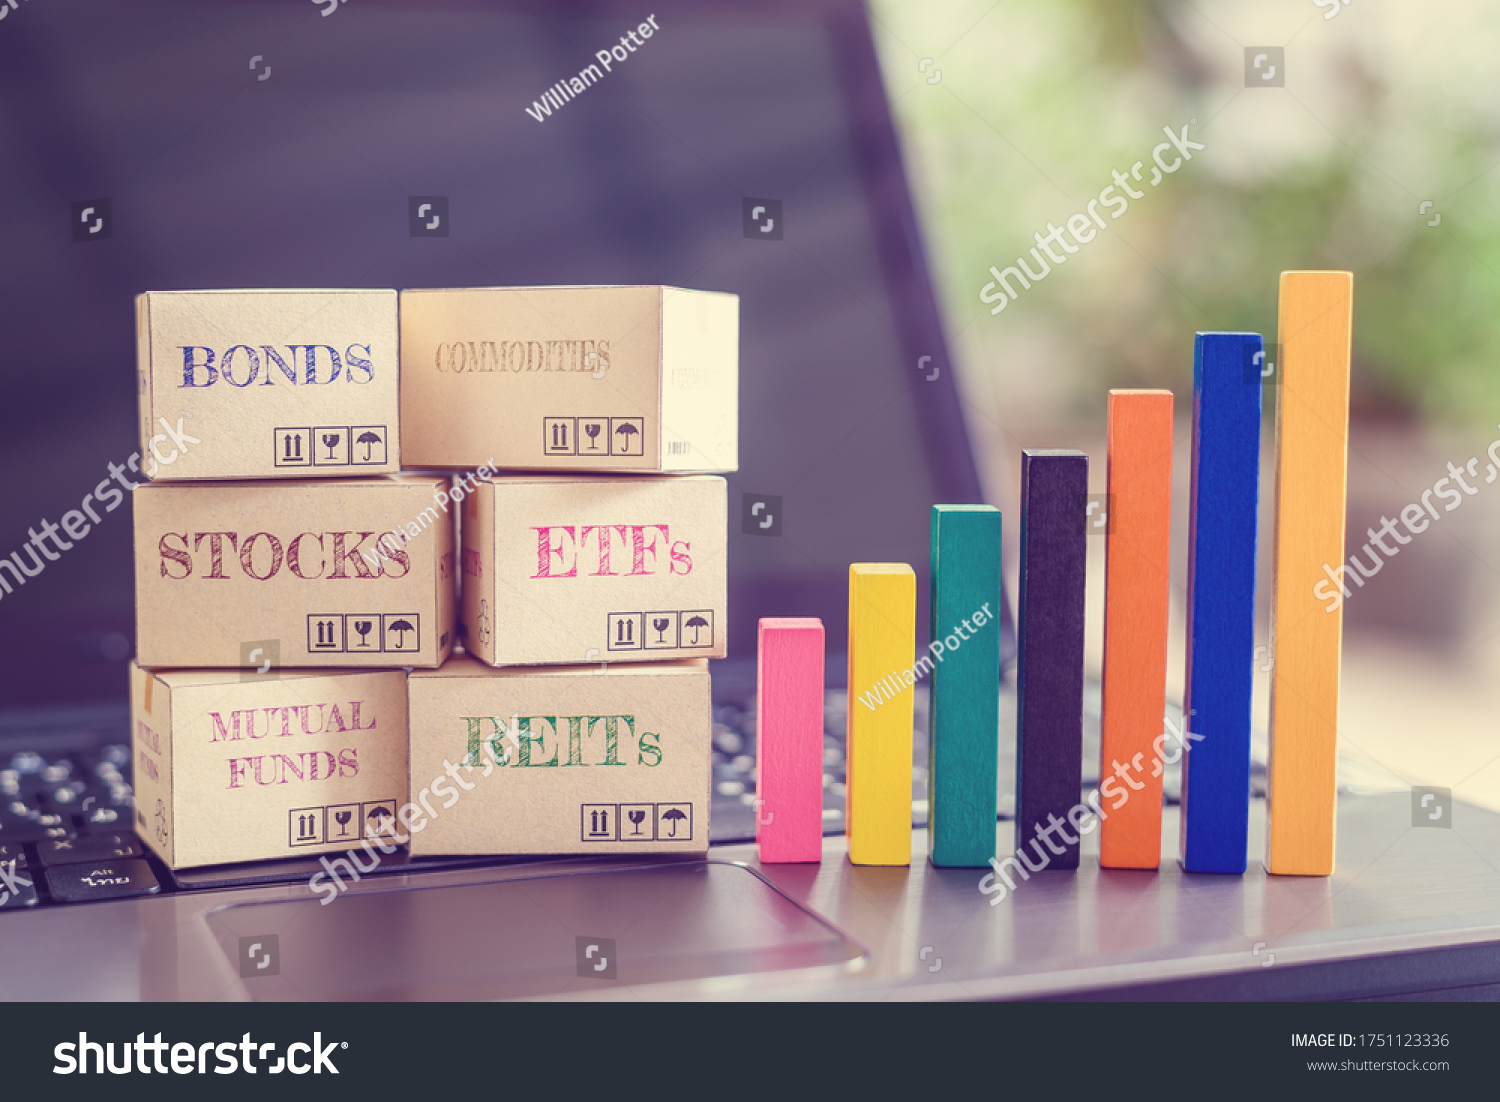 Online asset investment / portfolio diversification management for long-term profit growth concept : Boxes of financial products e.g bonds, commodities, stocks, mutual funds, ETFs, REITs on a laptop #1751123336